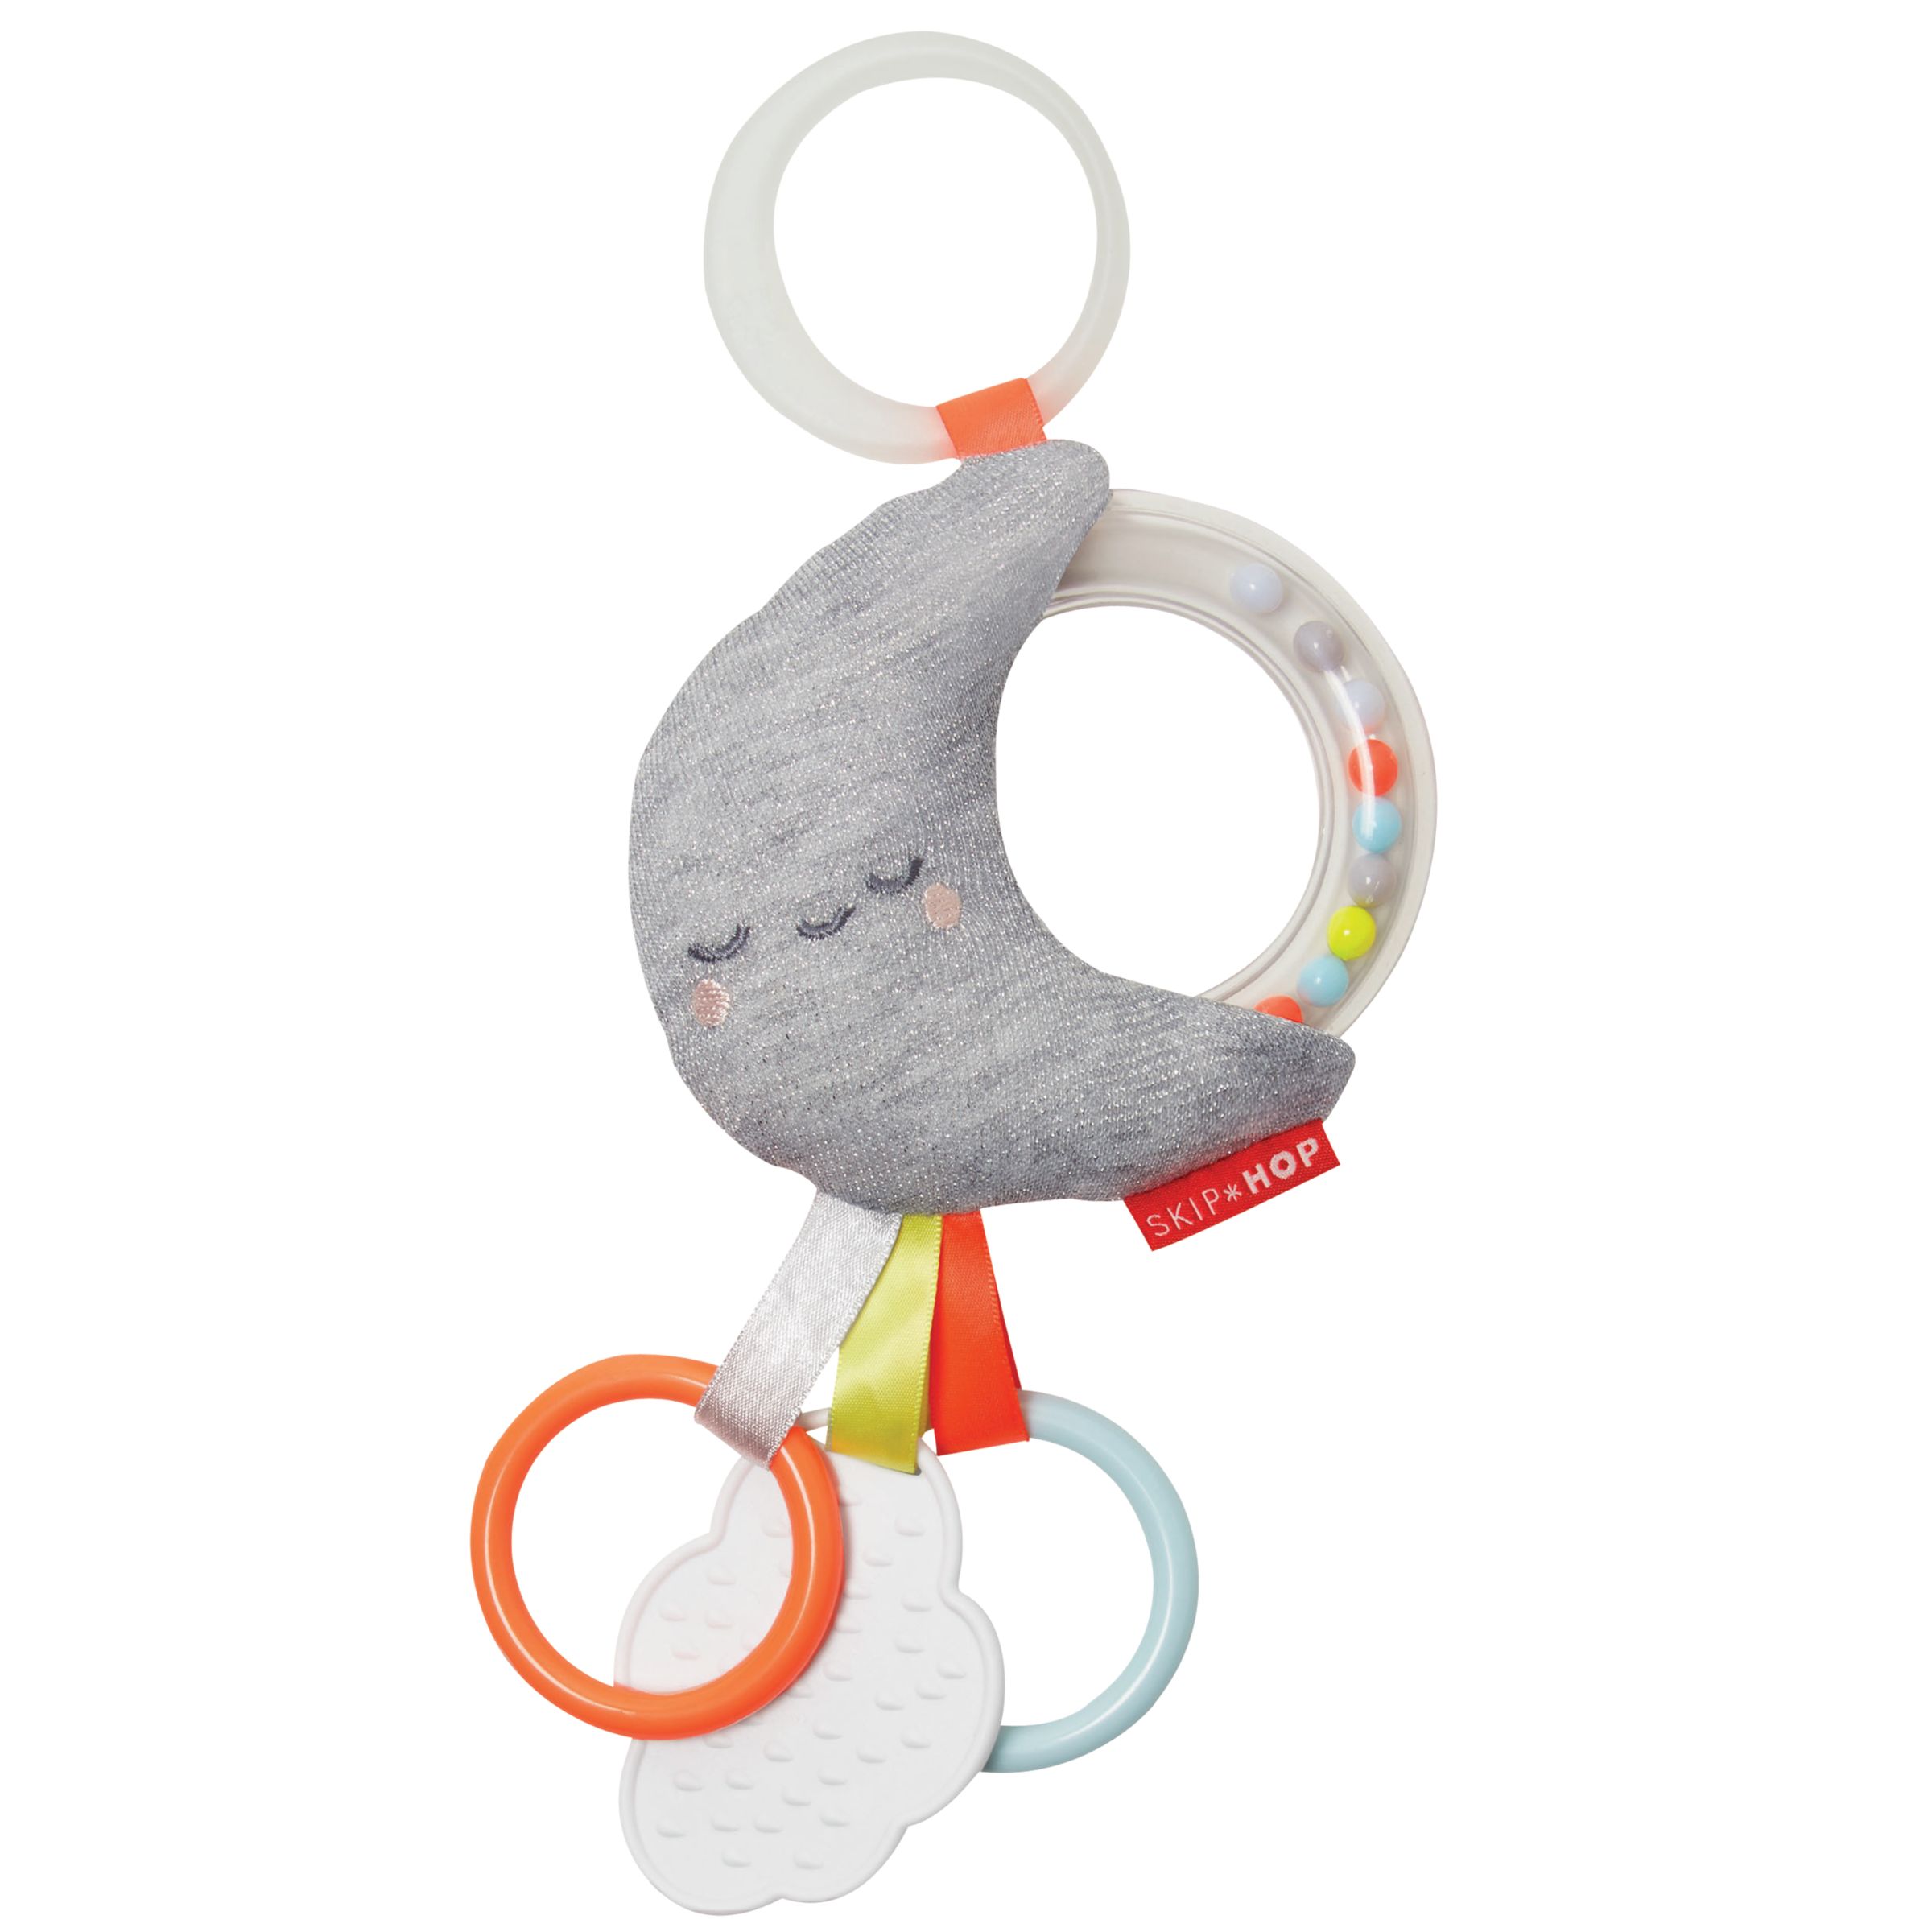 Skip Hop Moon and Cloud Rattle Stroller Toy